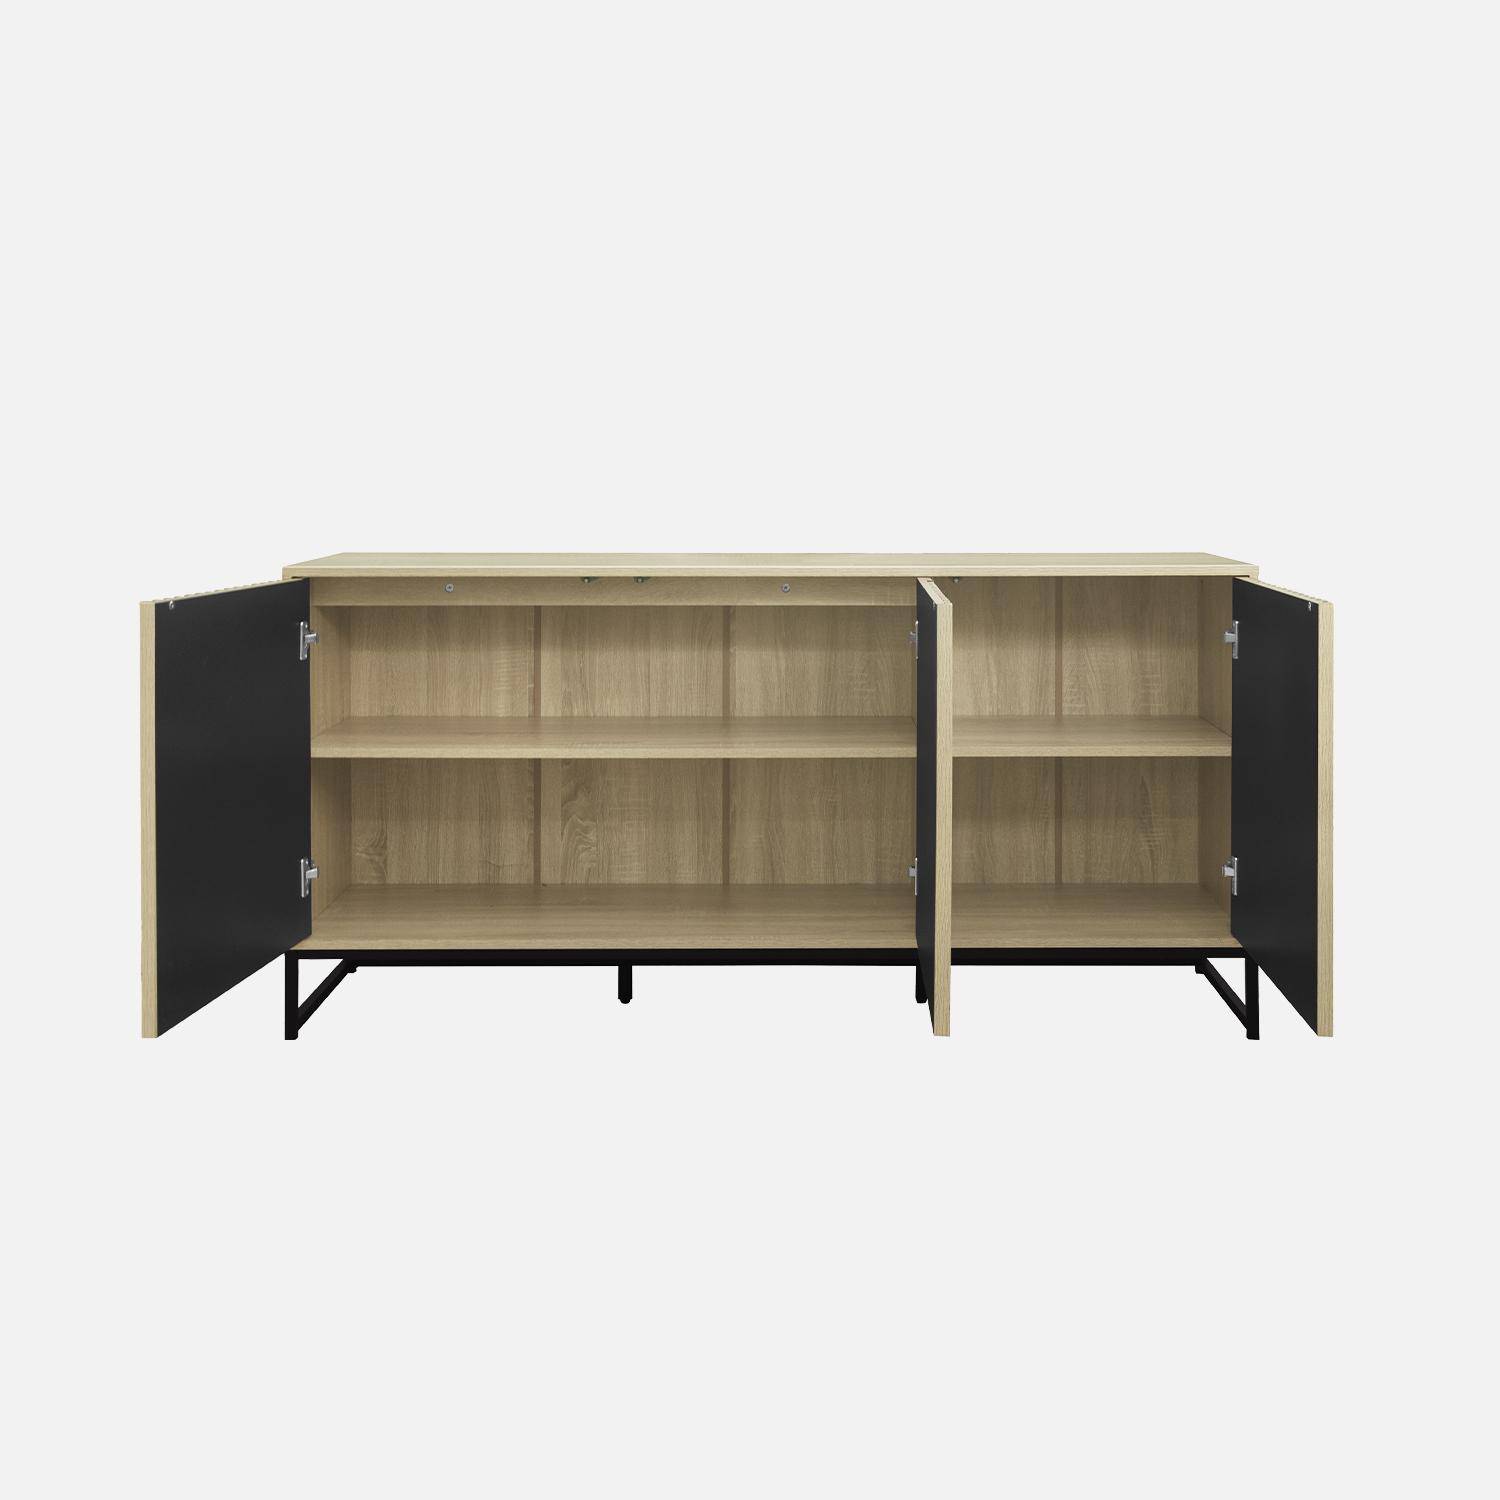 Contemporary-style sideboard with 3 grooved wood-effect doors, push-open, black metal frame L160,sweeek,Photo3